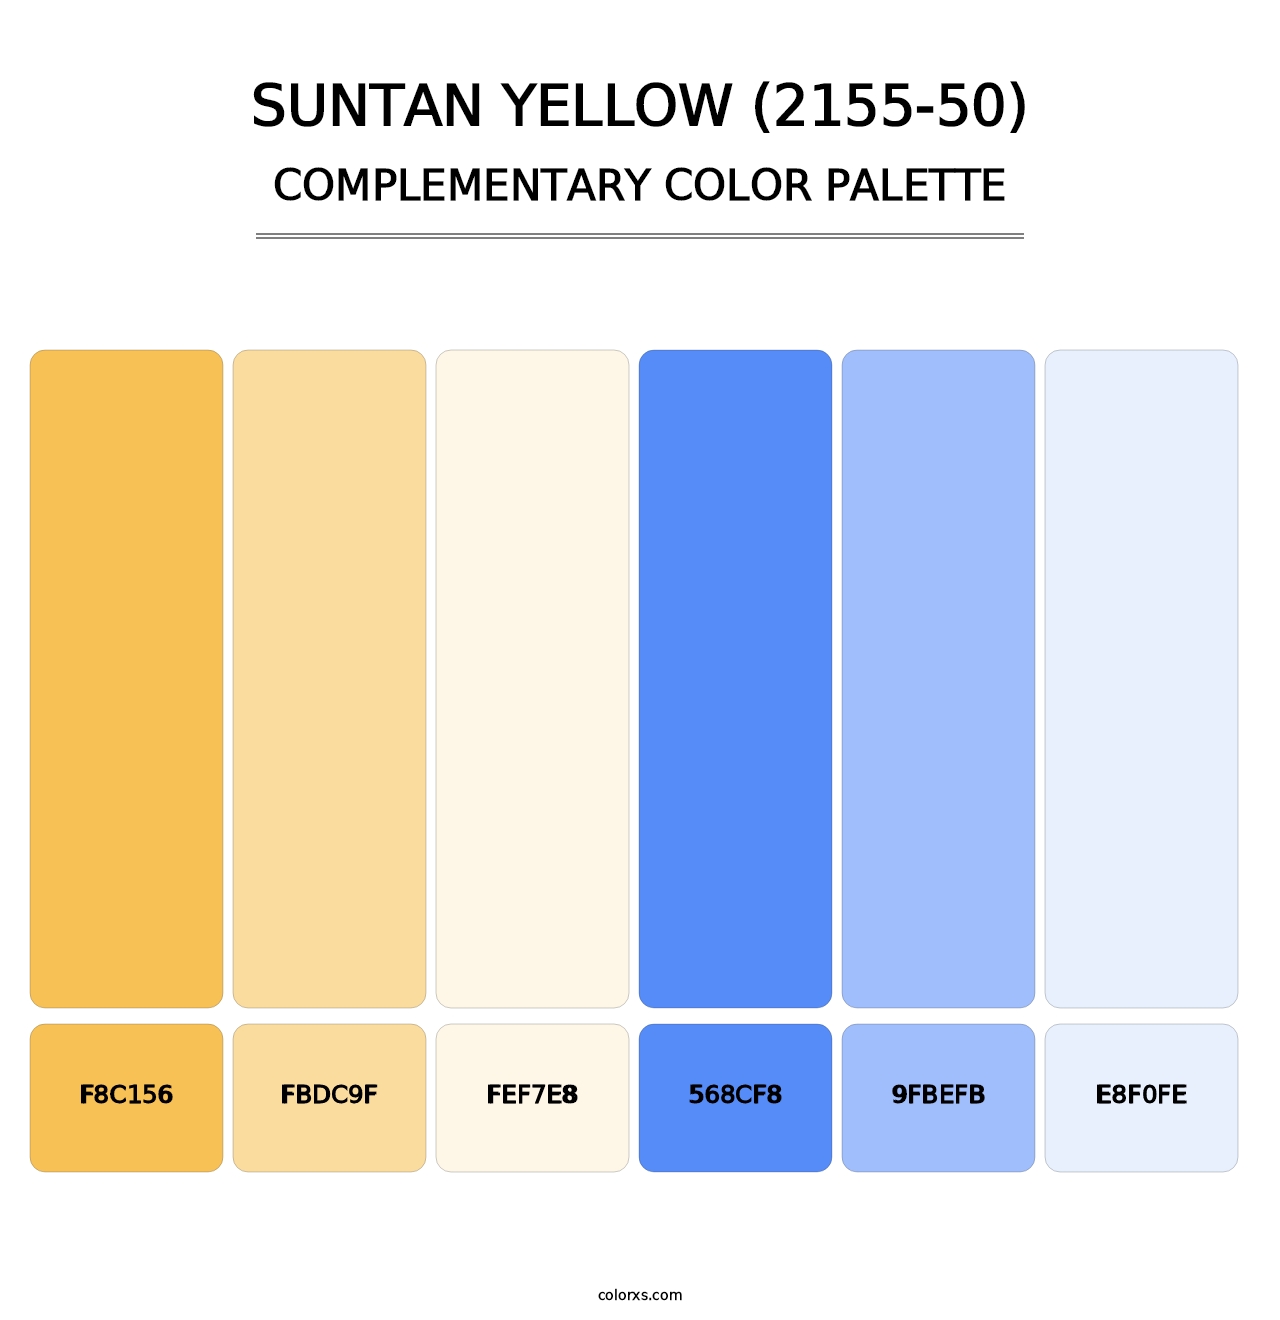 Suntan Yellow (2155-50) - Complementary Color Palette